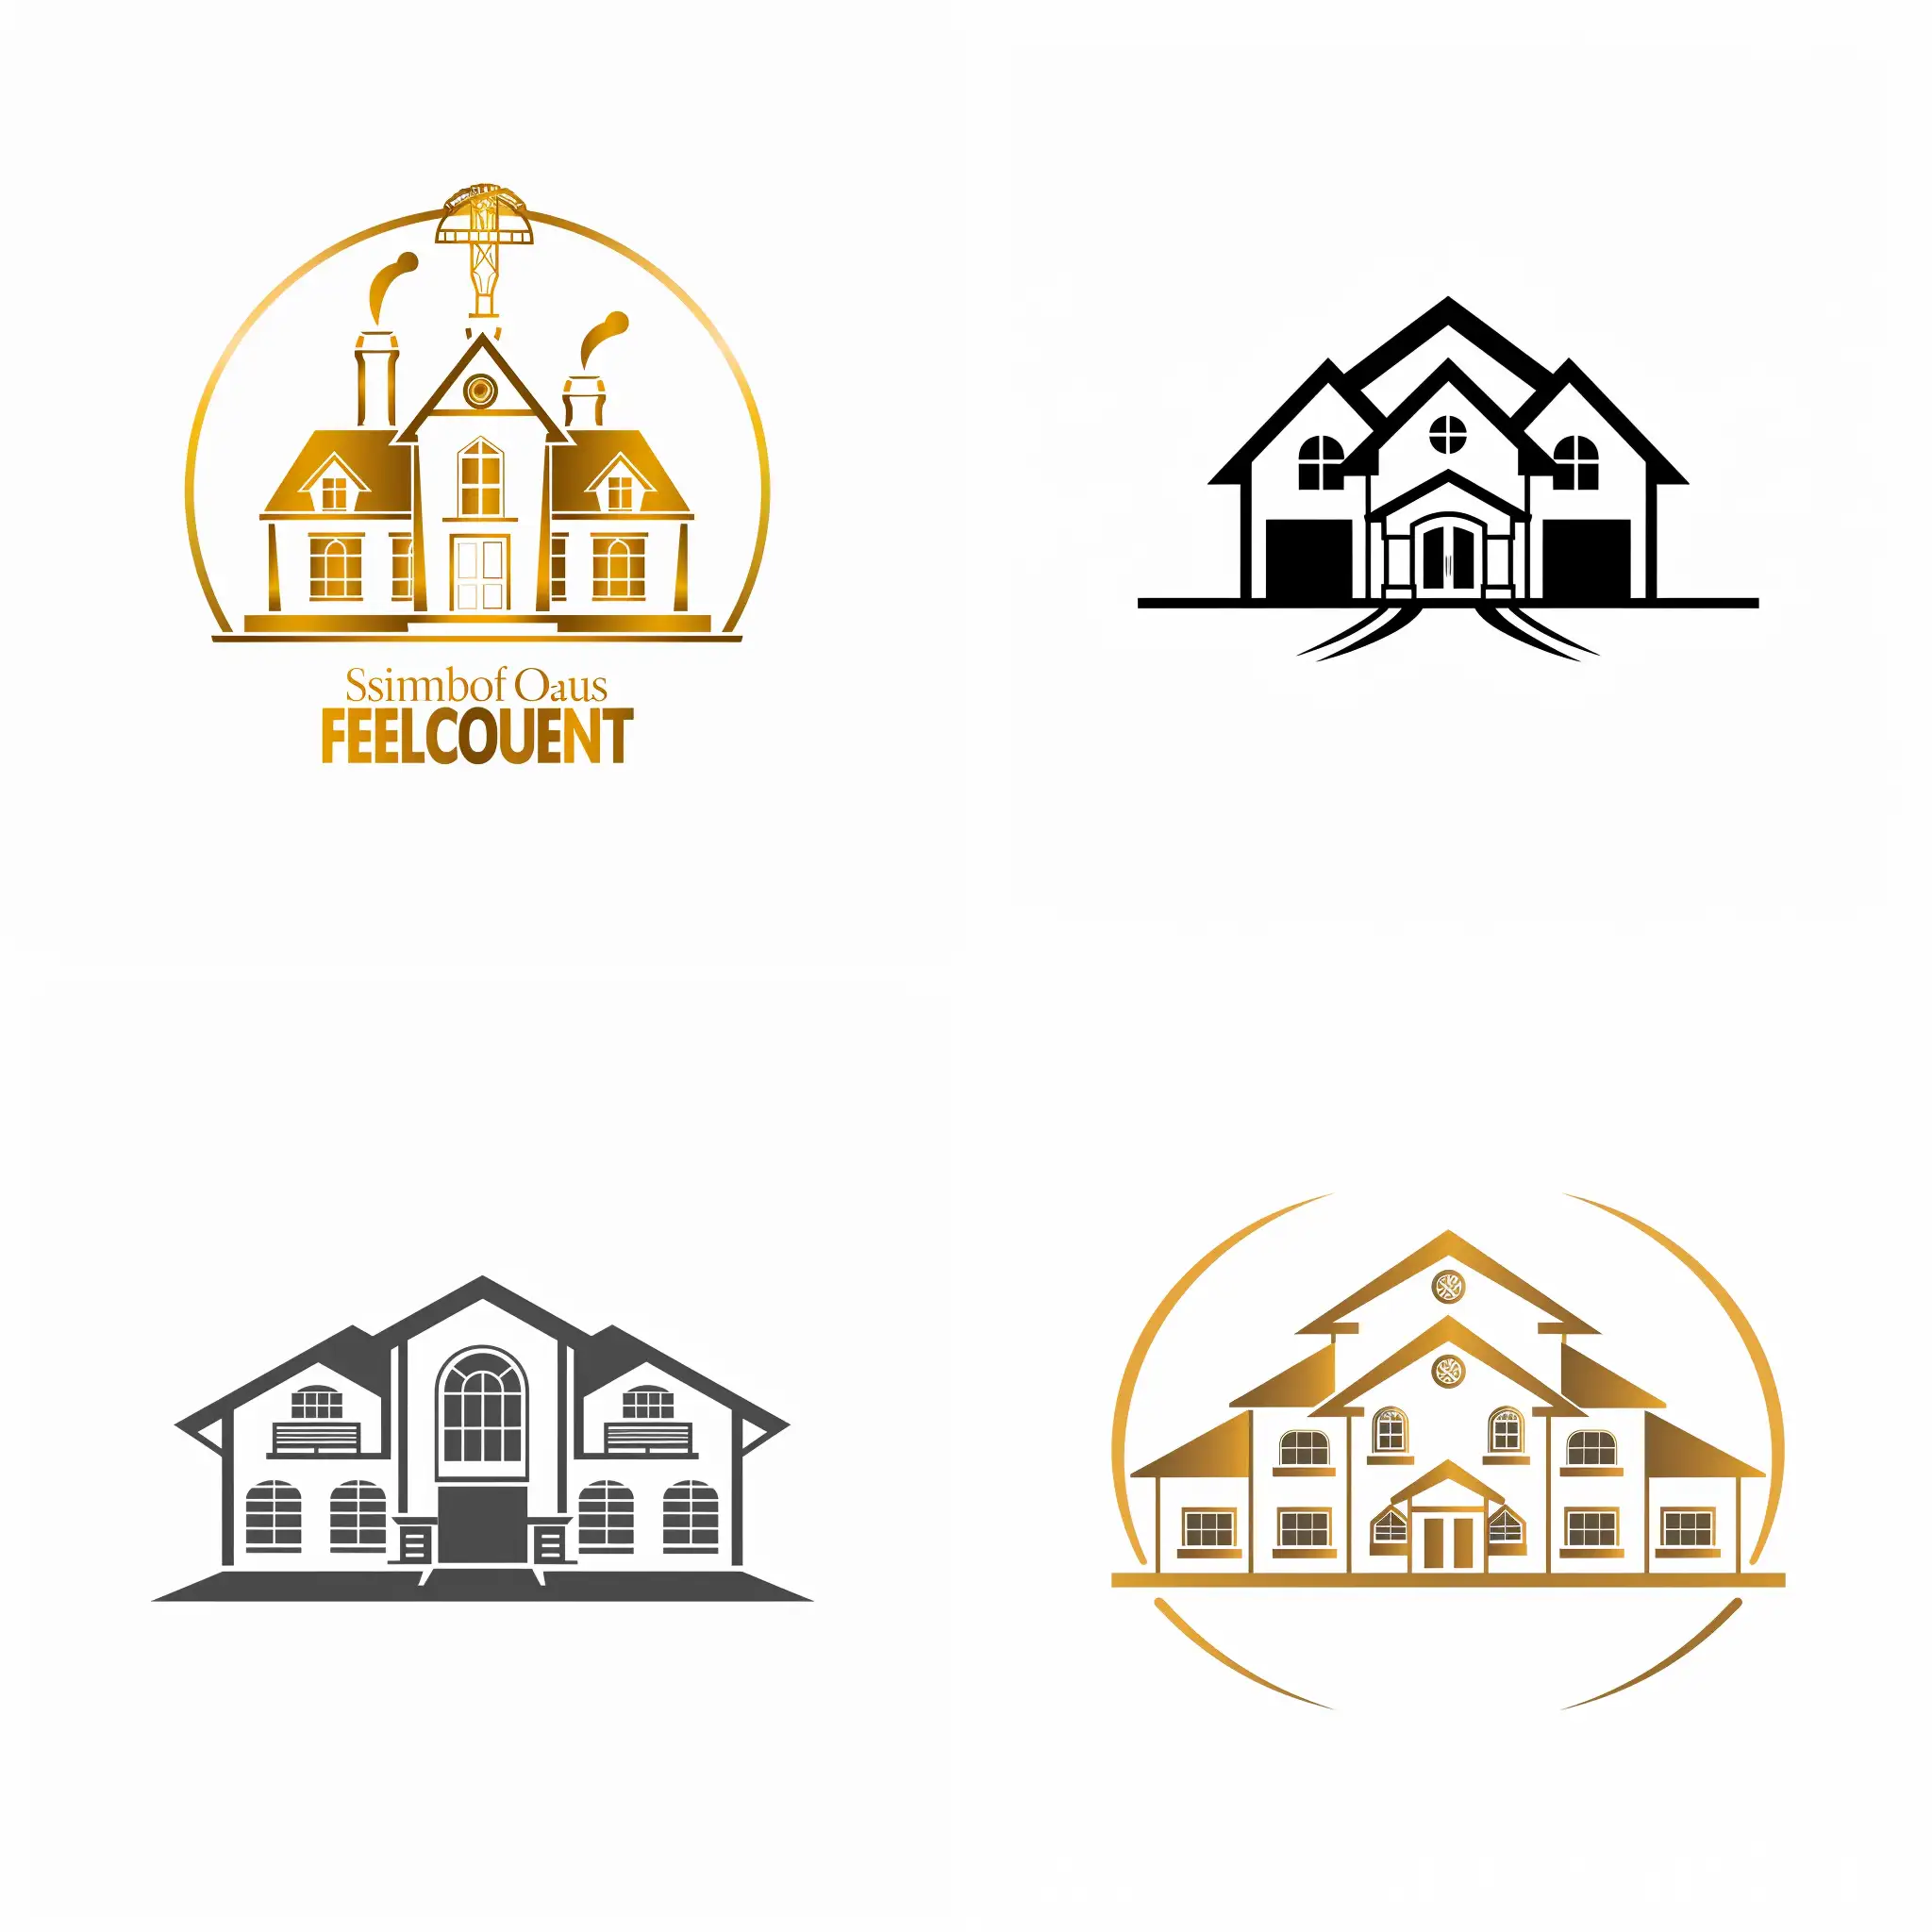 Minimalist-Luxury-House-Logo-for-Real-Estate-Agents